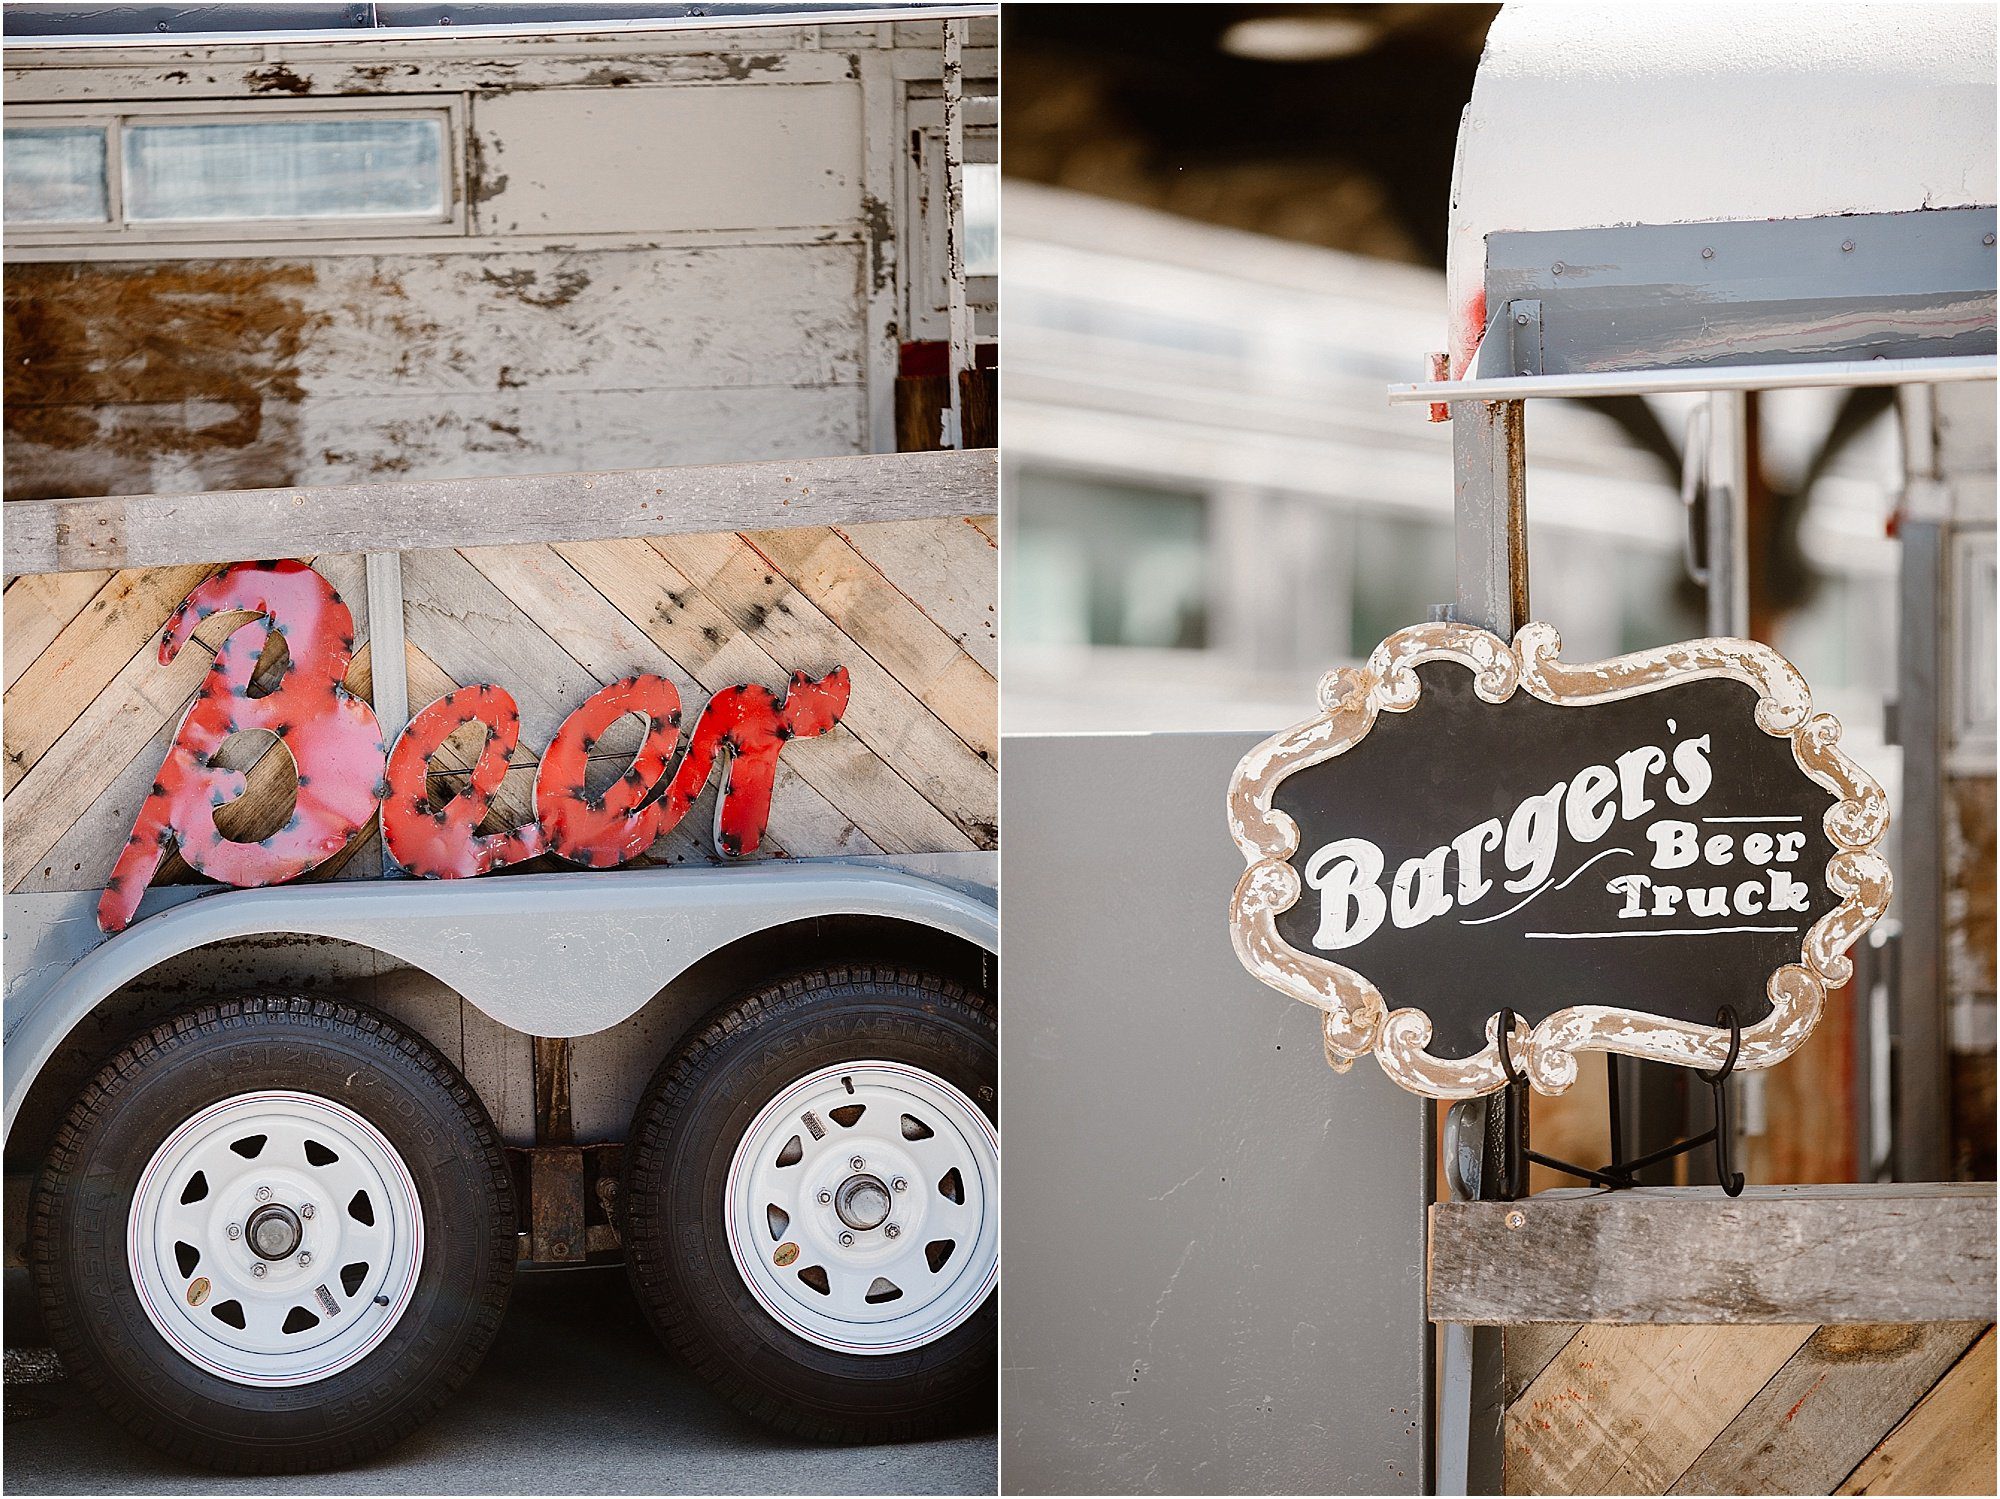 Barger Beer Truck Knoxville